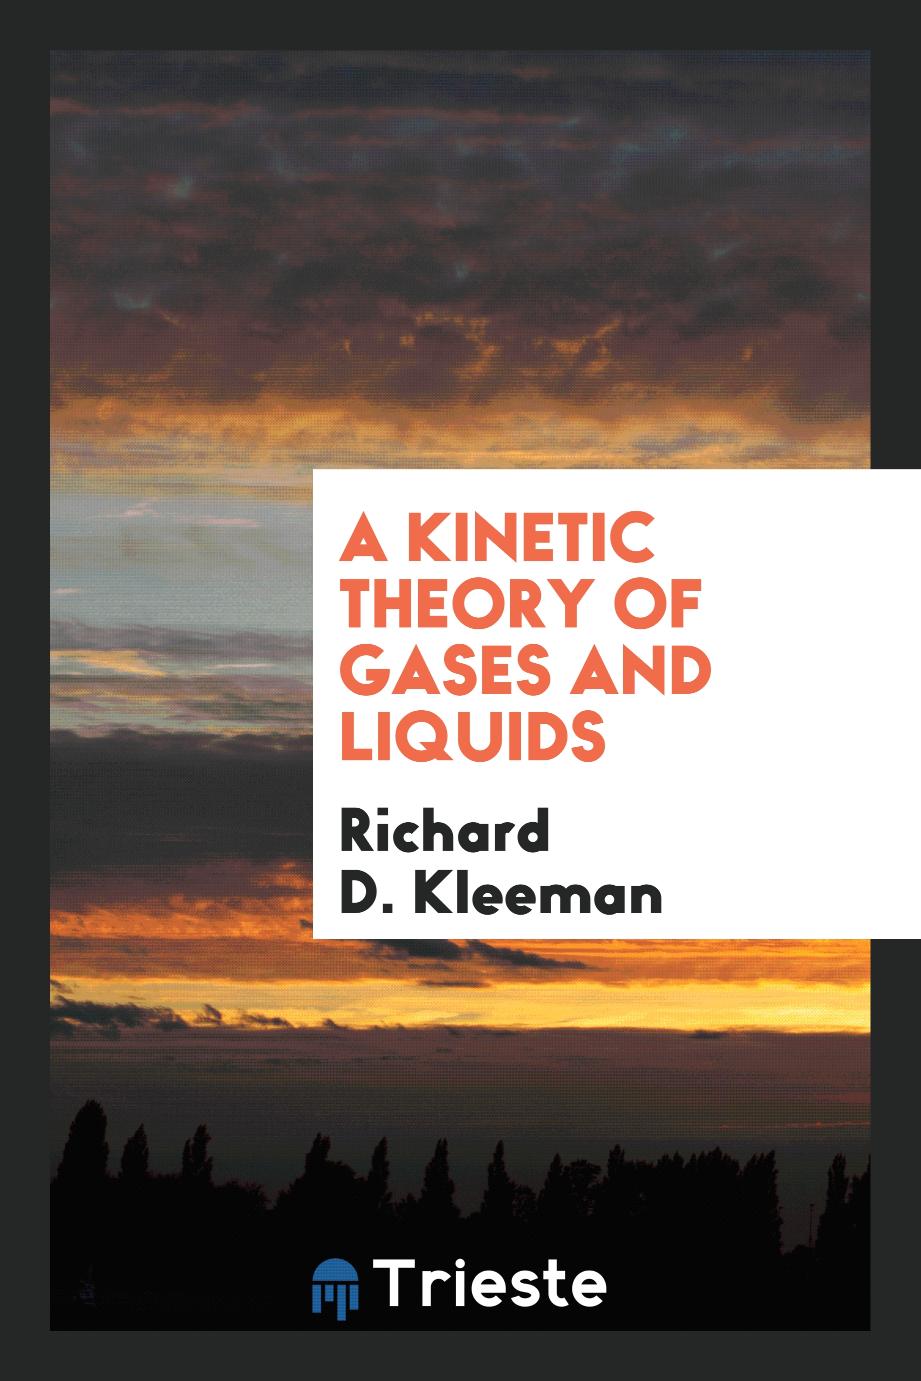 A kinetic theory of gases and liquids